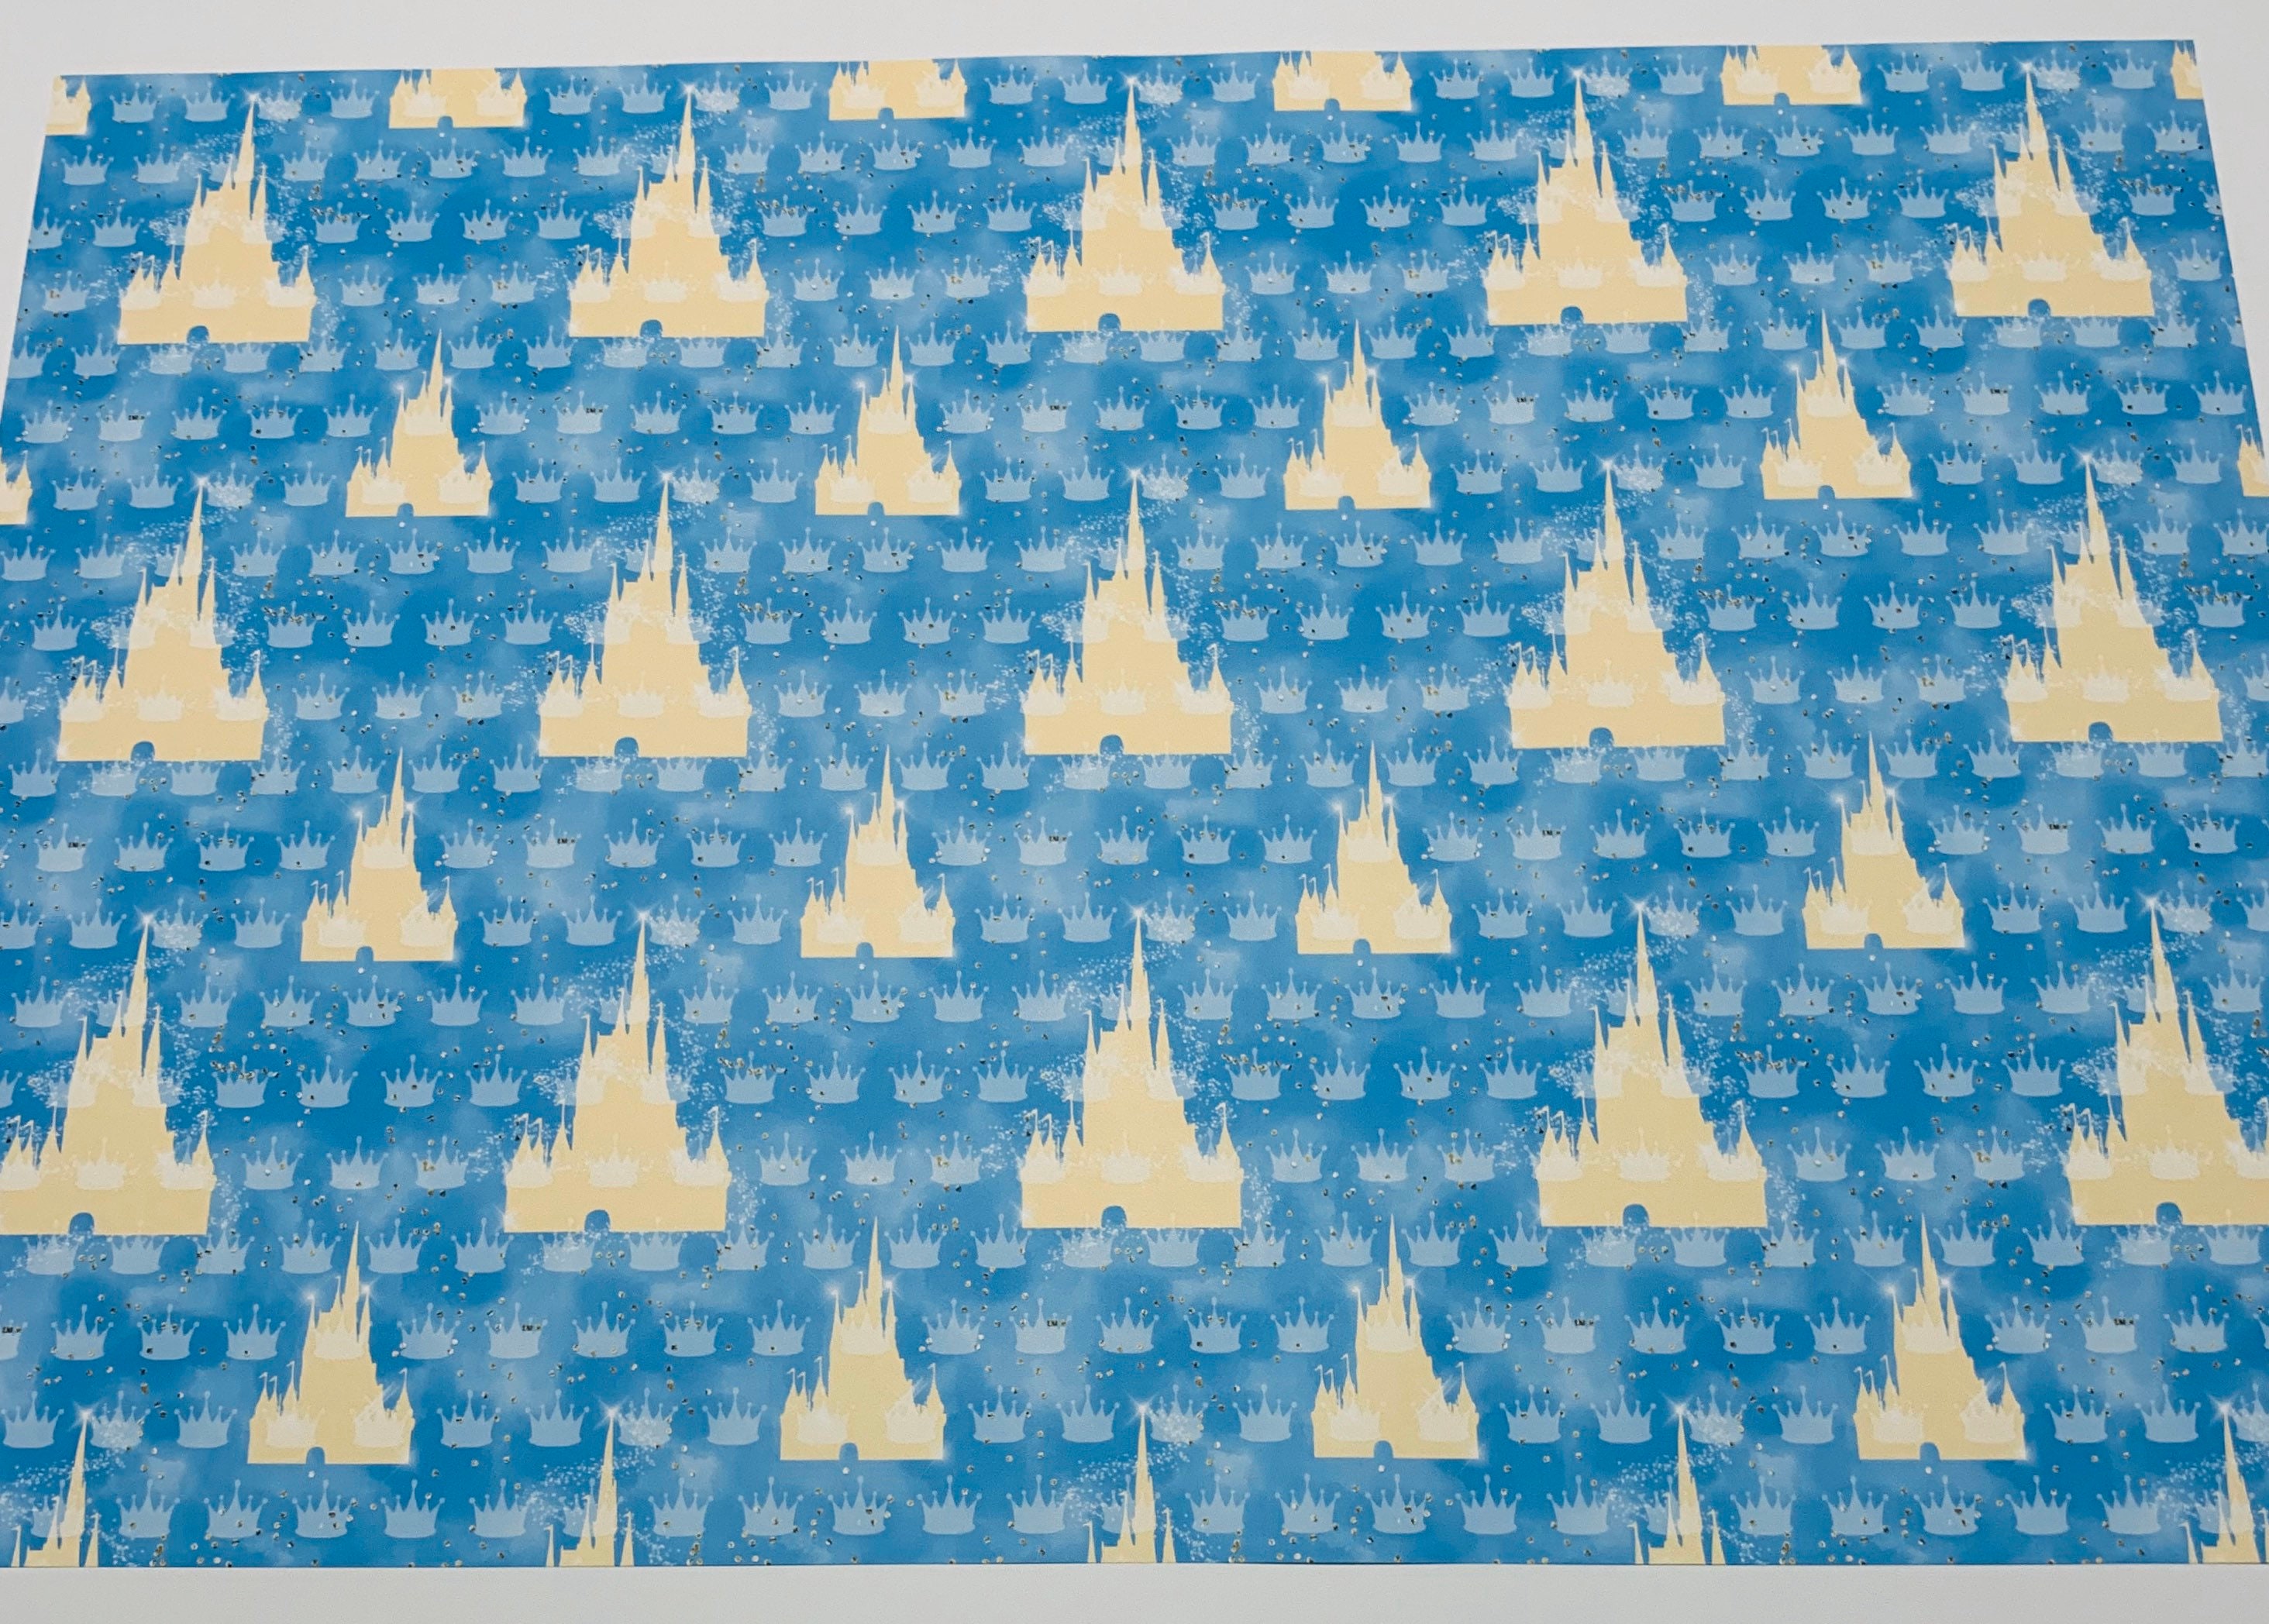 Disney Castle Wrapping Paper Sheets